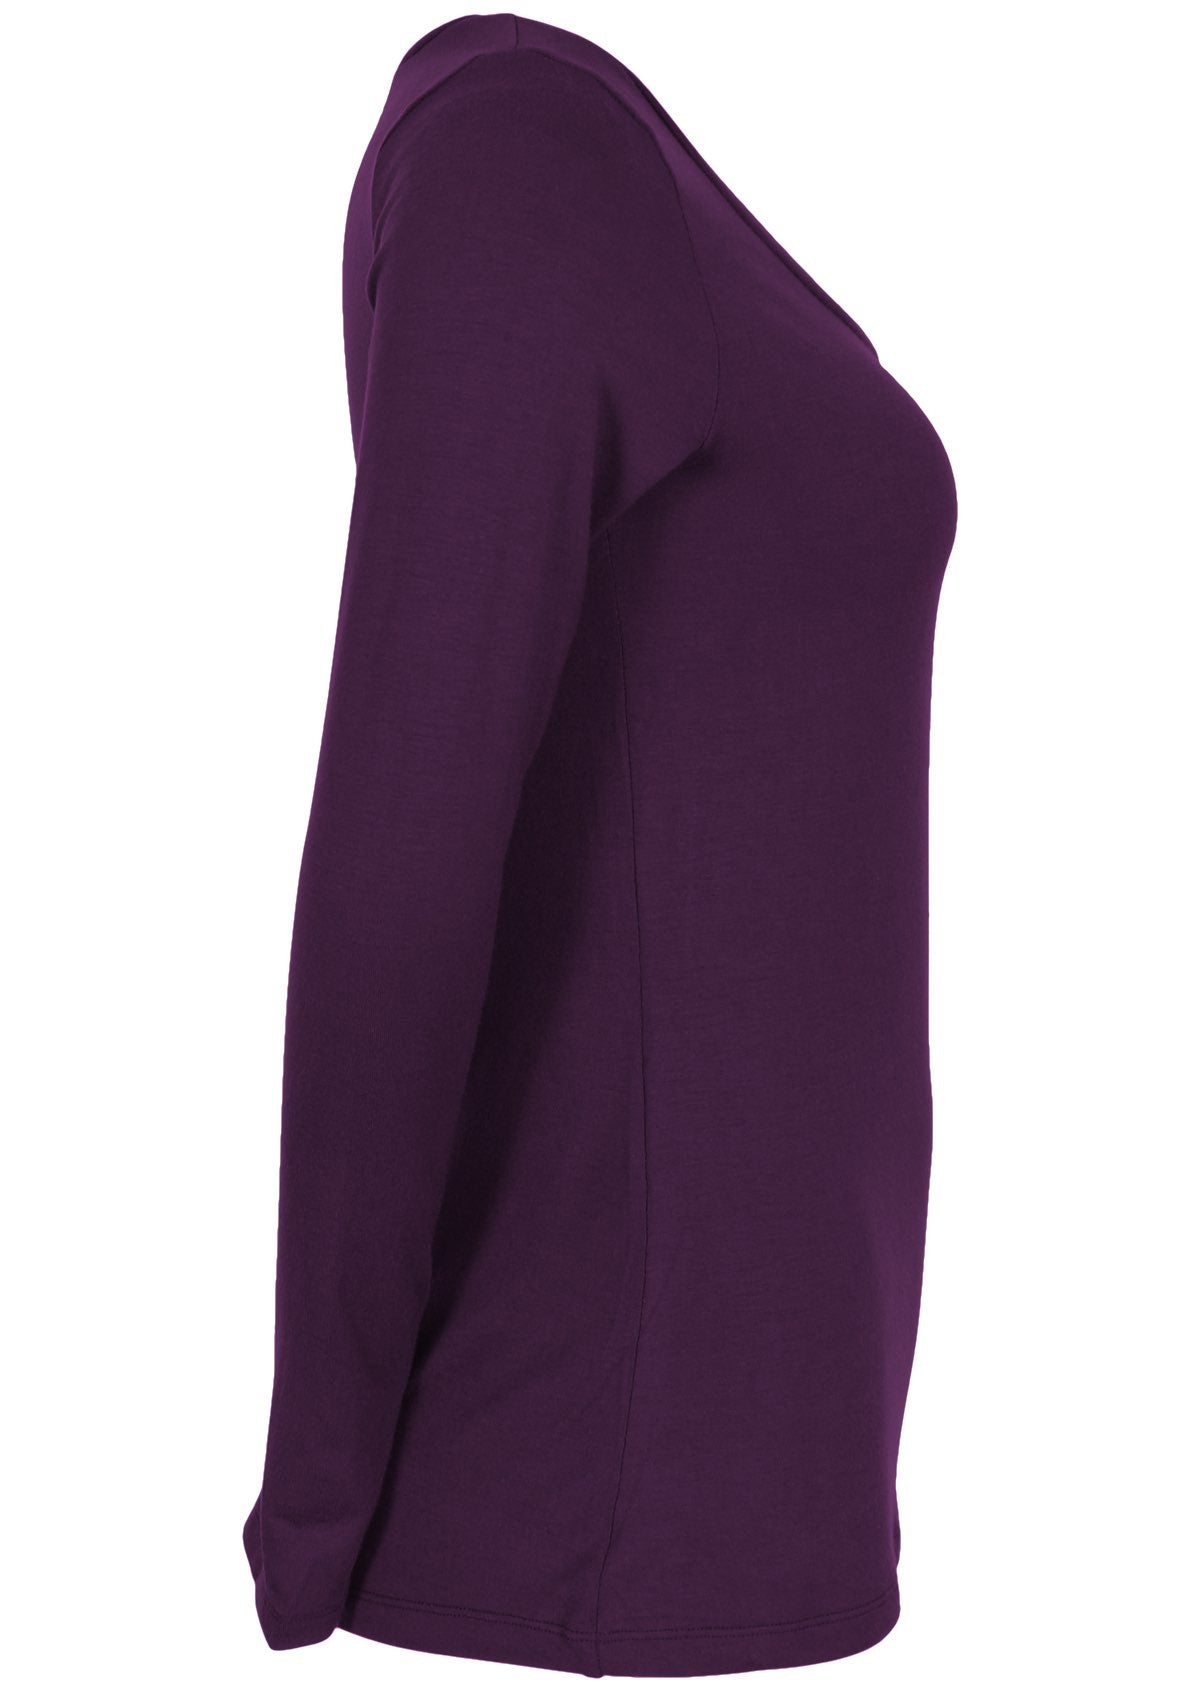 Side view of women's purple long sleeve stretch v-neck soft rayon top.